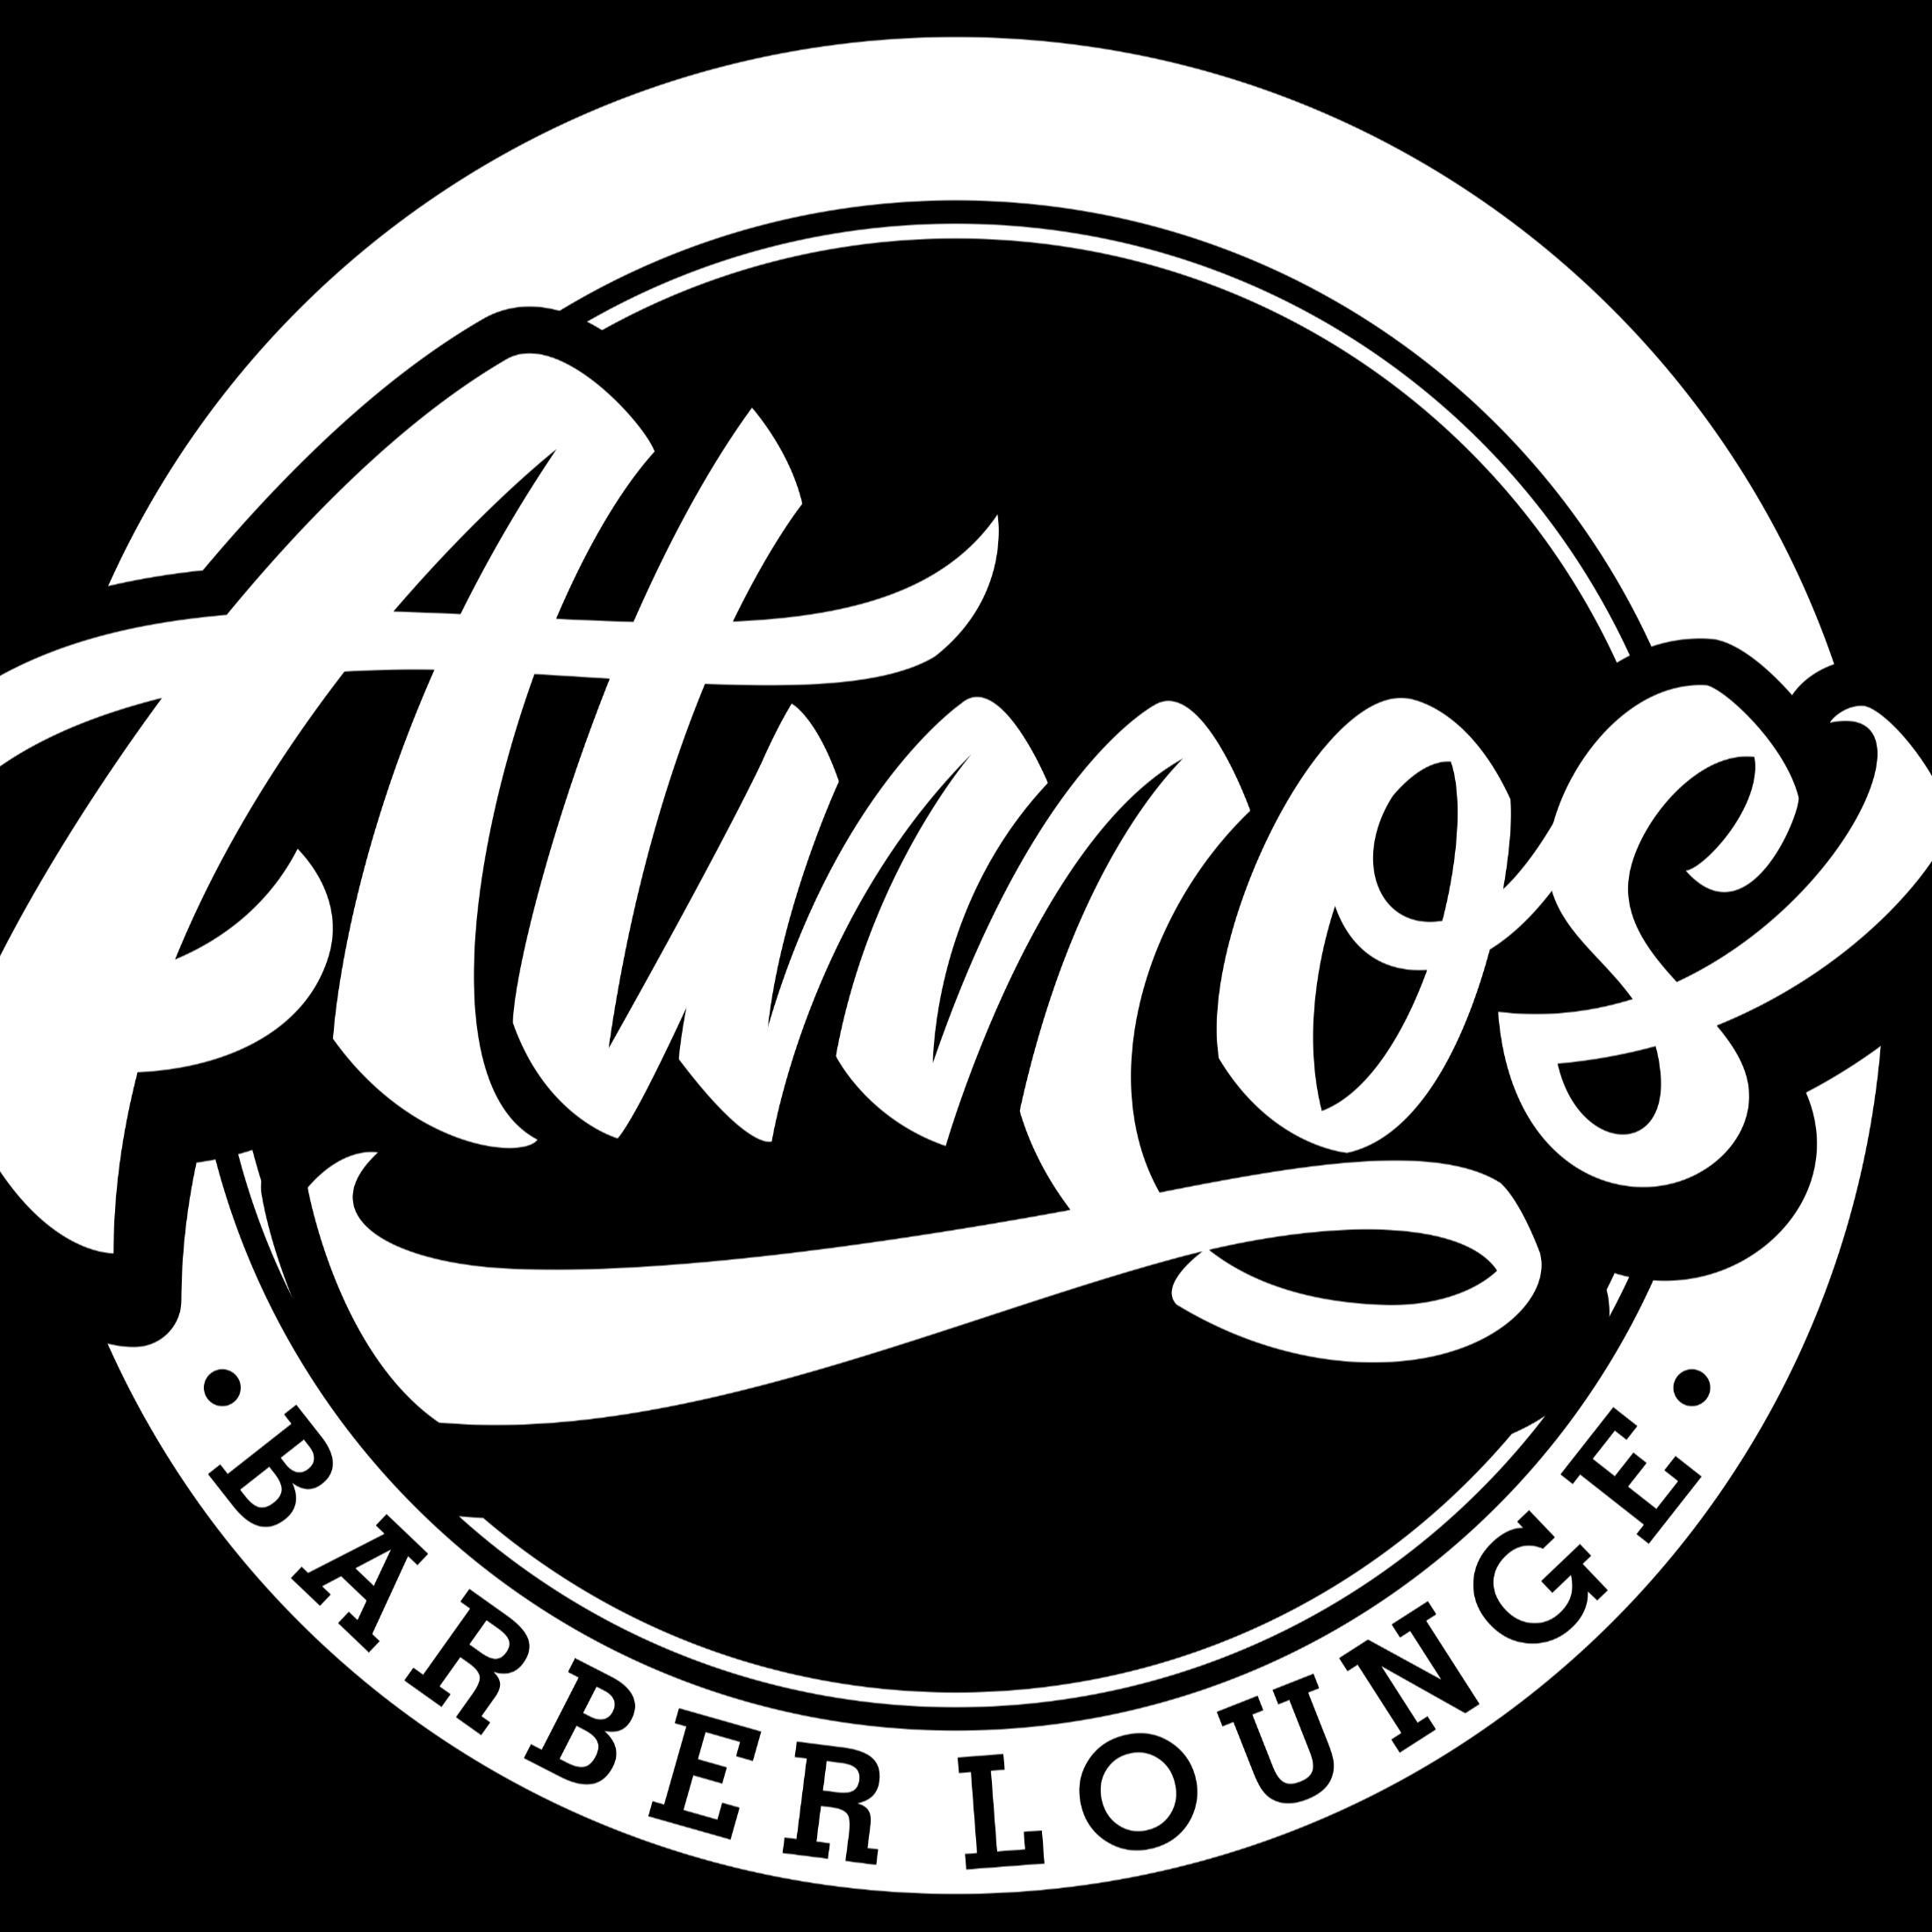 Atmos barber lounge, 9455 Foothill Blvd, 105, Rancho Cucamonga, 91730